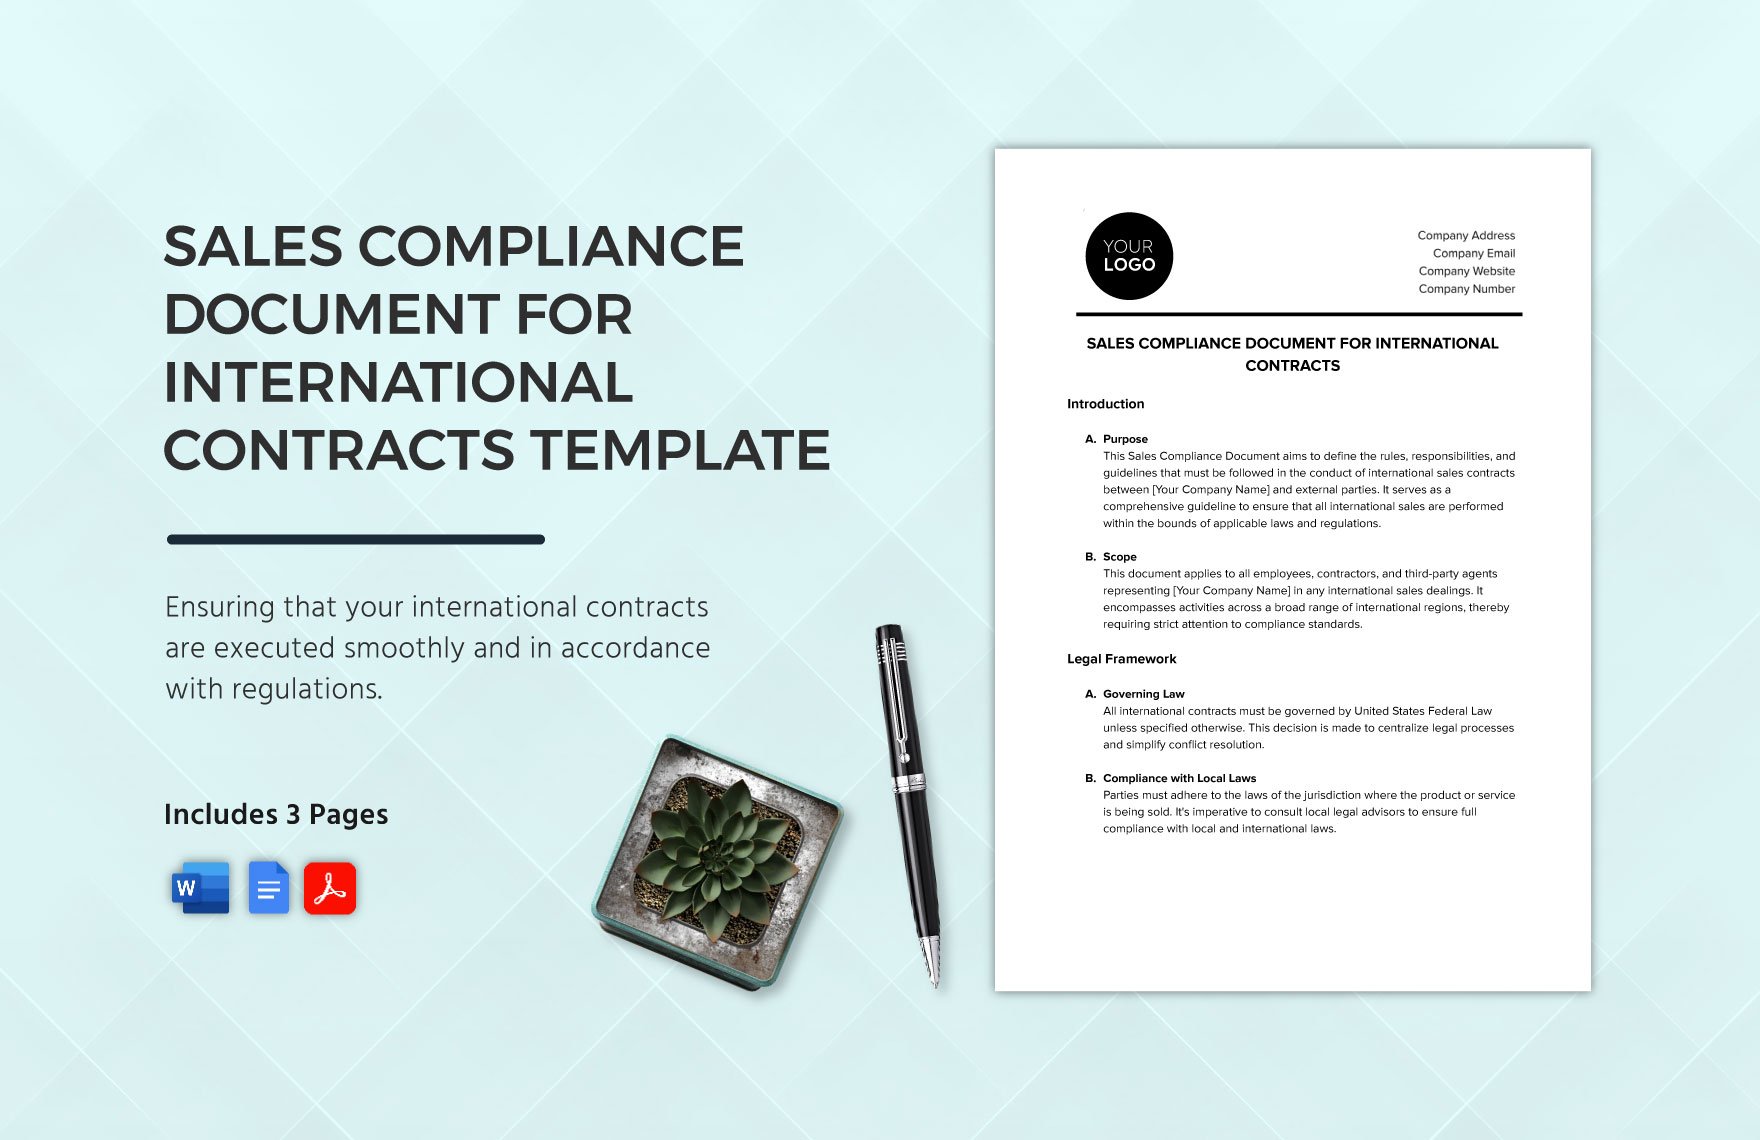 Sales Compliance Document for International Contracts Template in Word, Google Docs, PDF